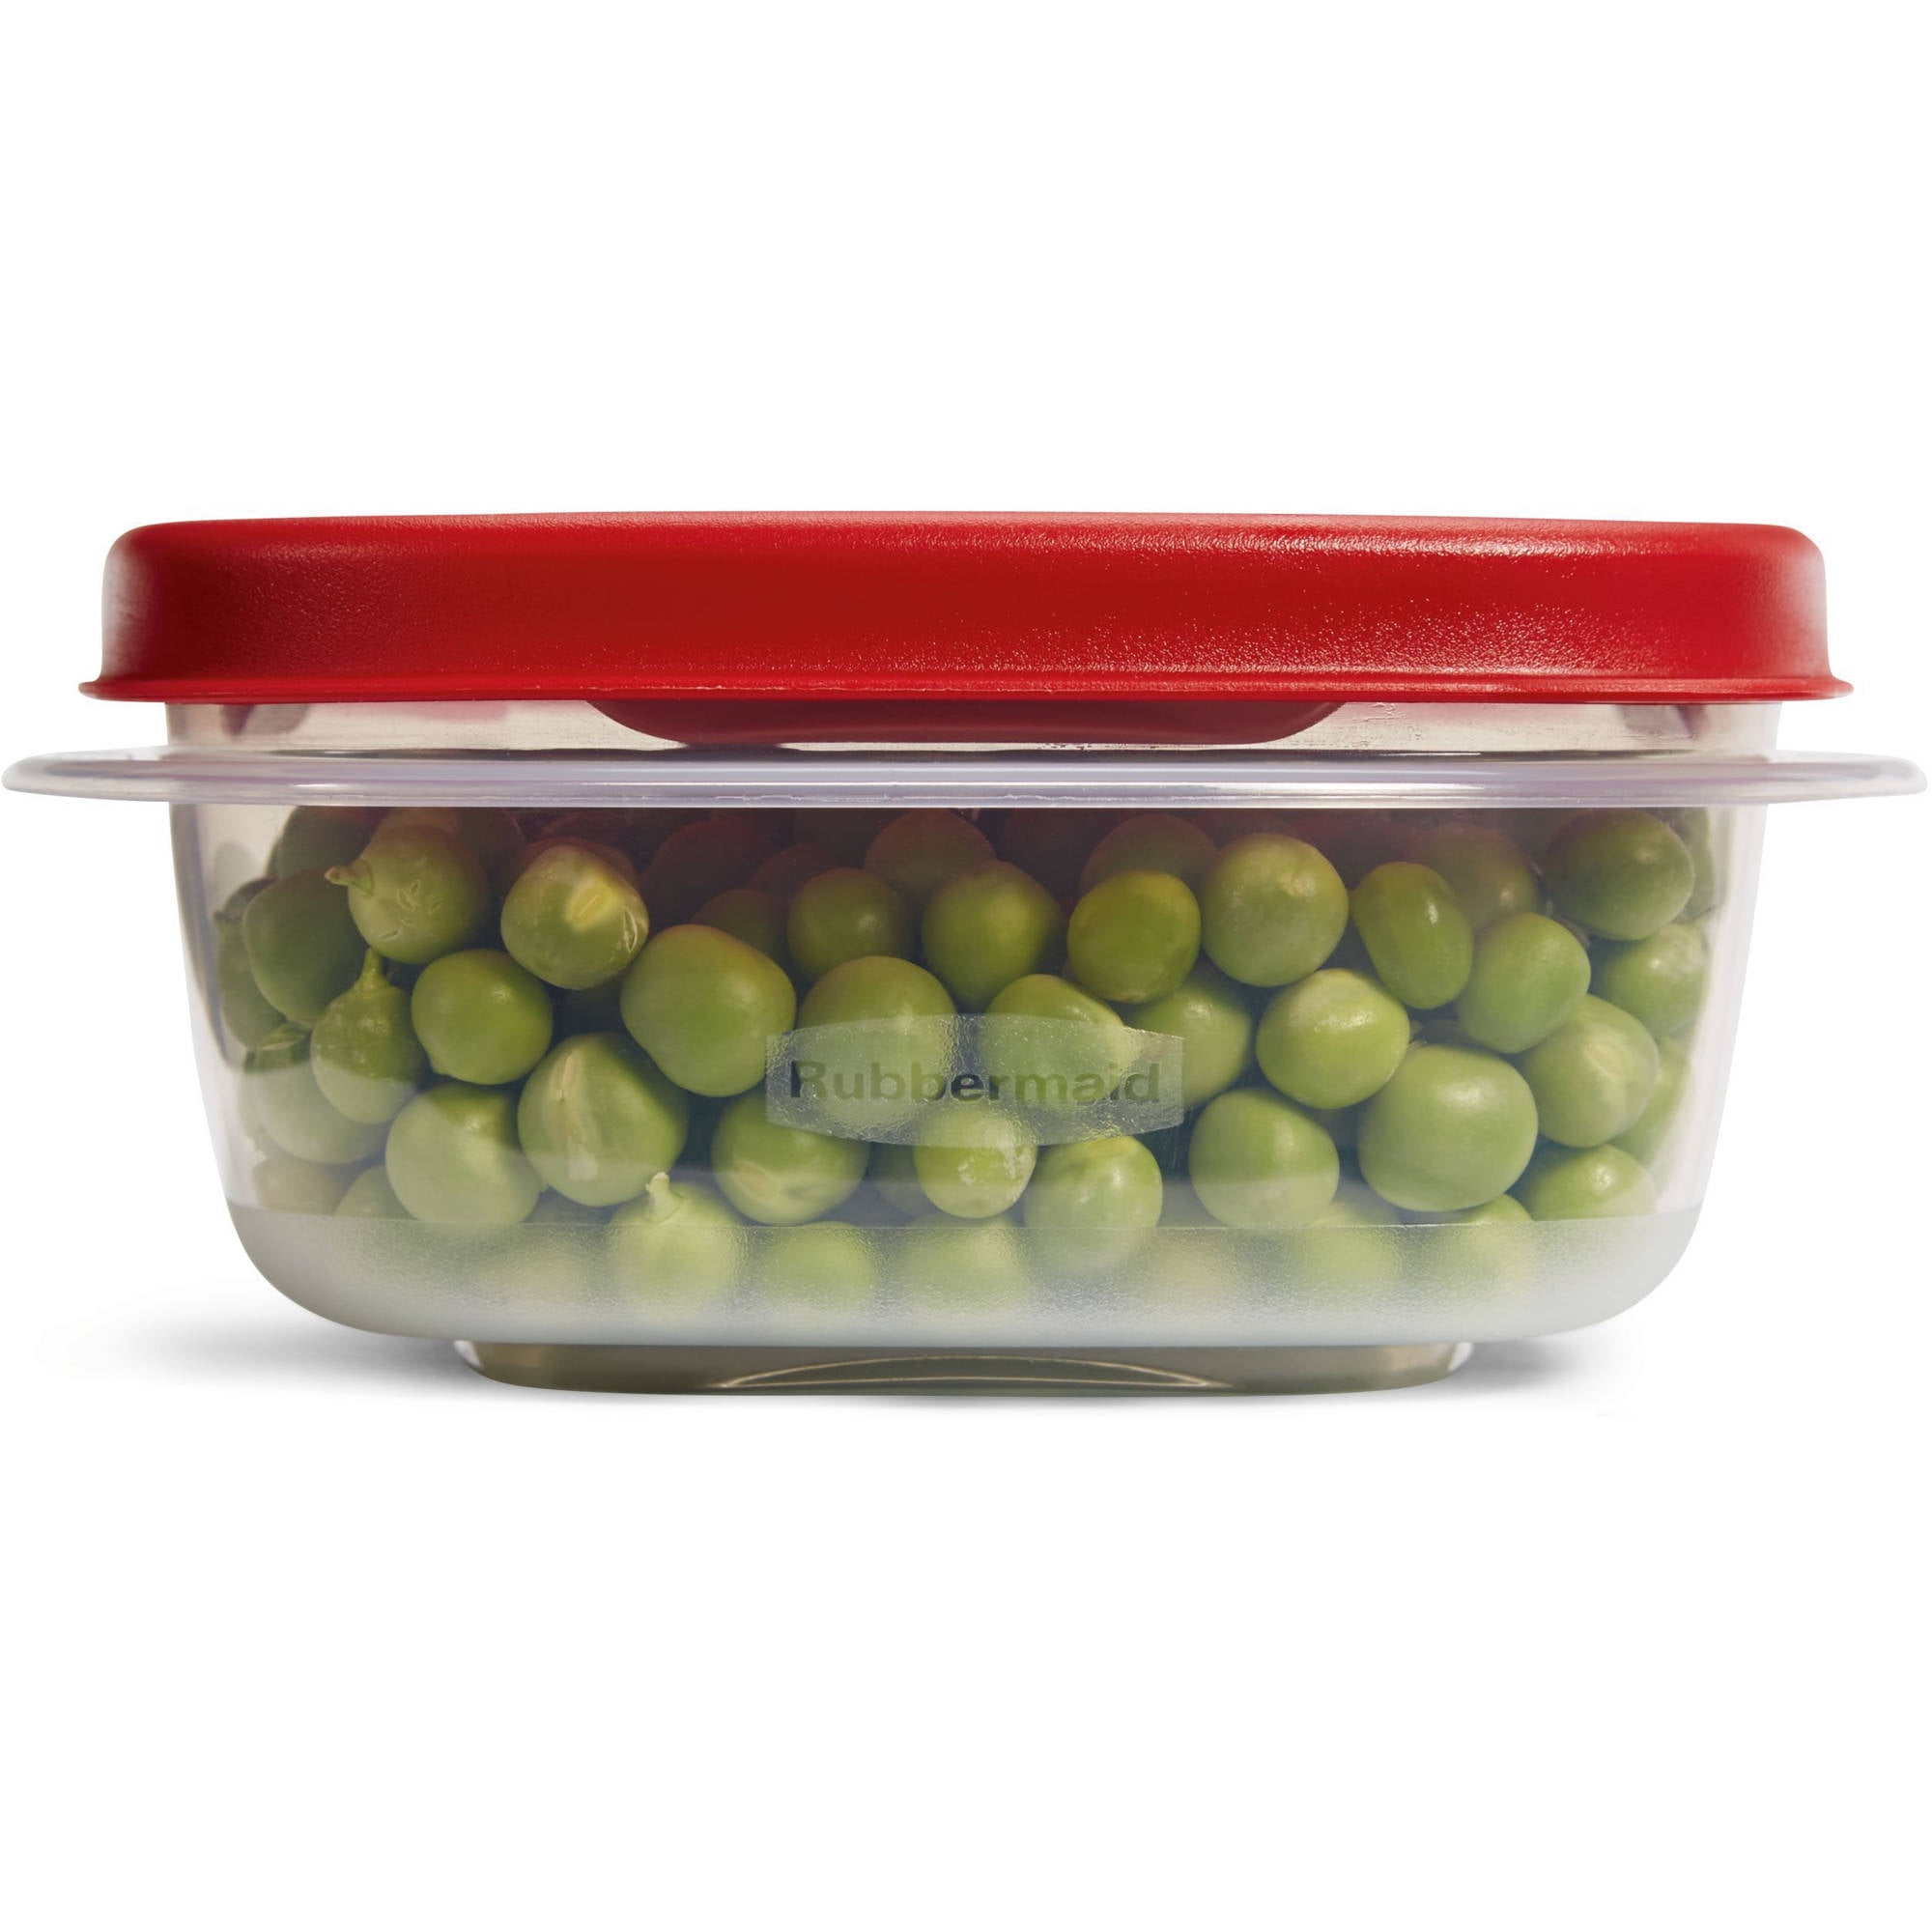 Rubbermaid Home 2039756 Easy Find Lids Durable Food Container Pack Of 3:  Covered Storage Small Up To 1 Liter or 33 Ounces (071691512080-1)